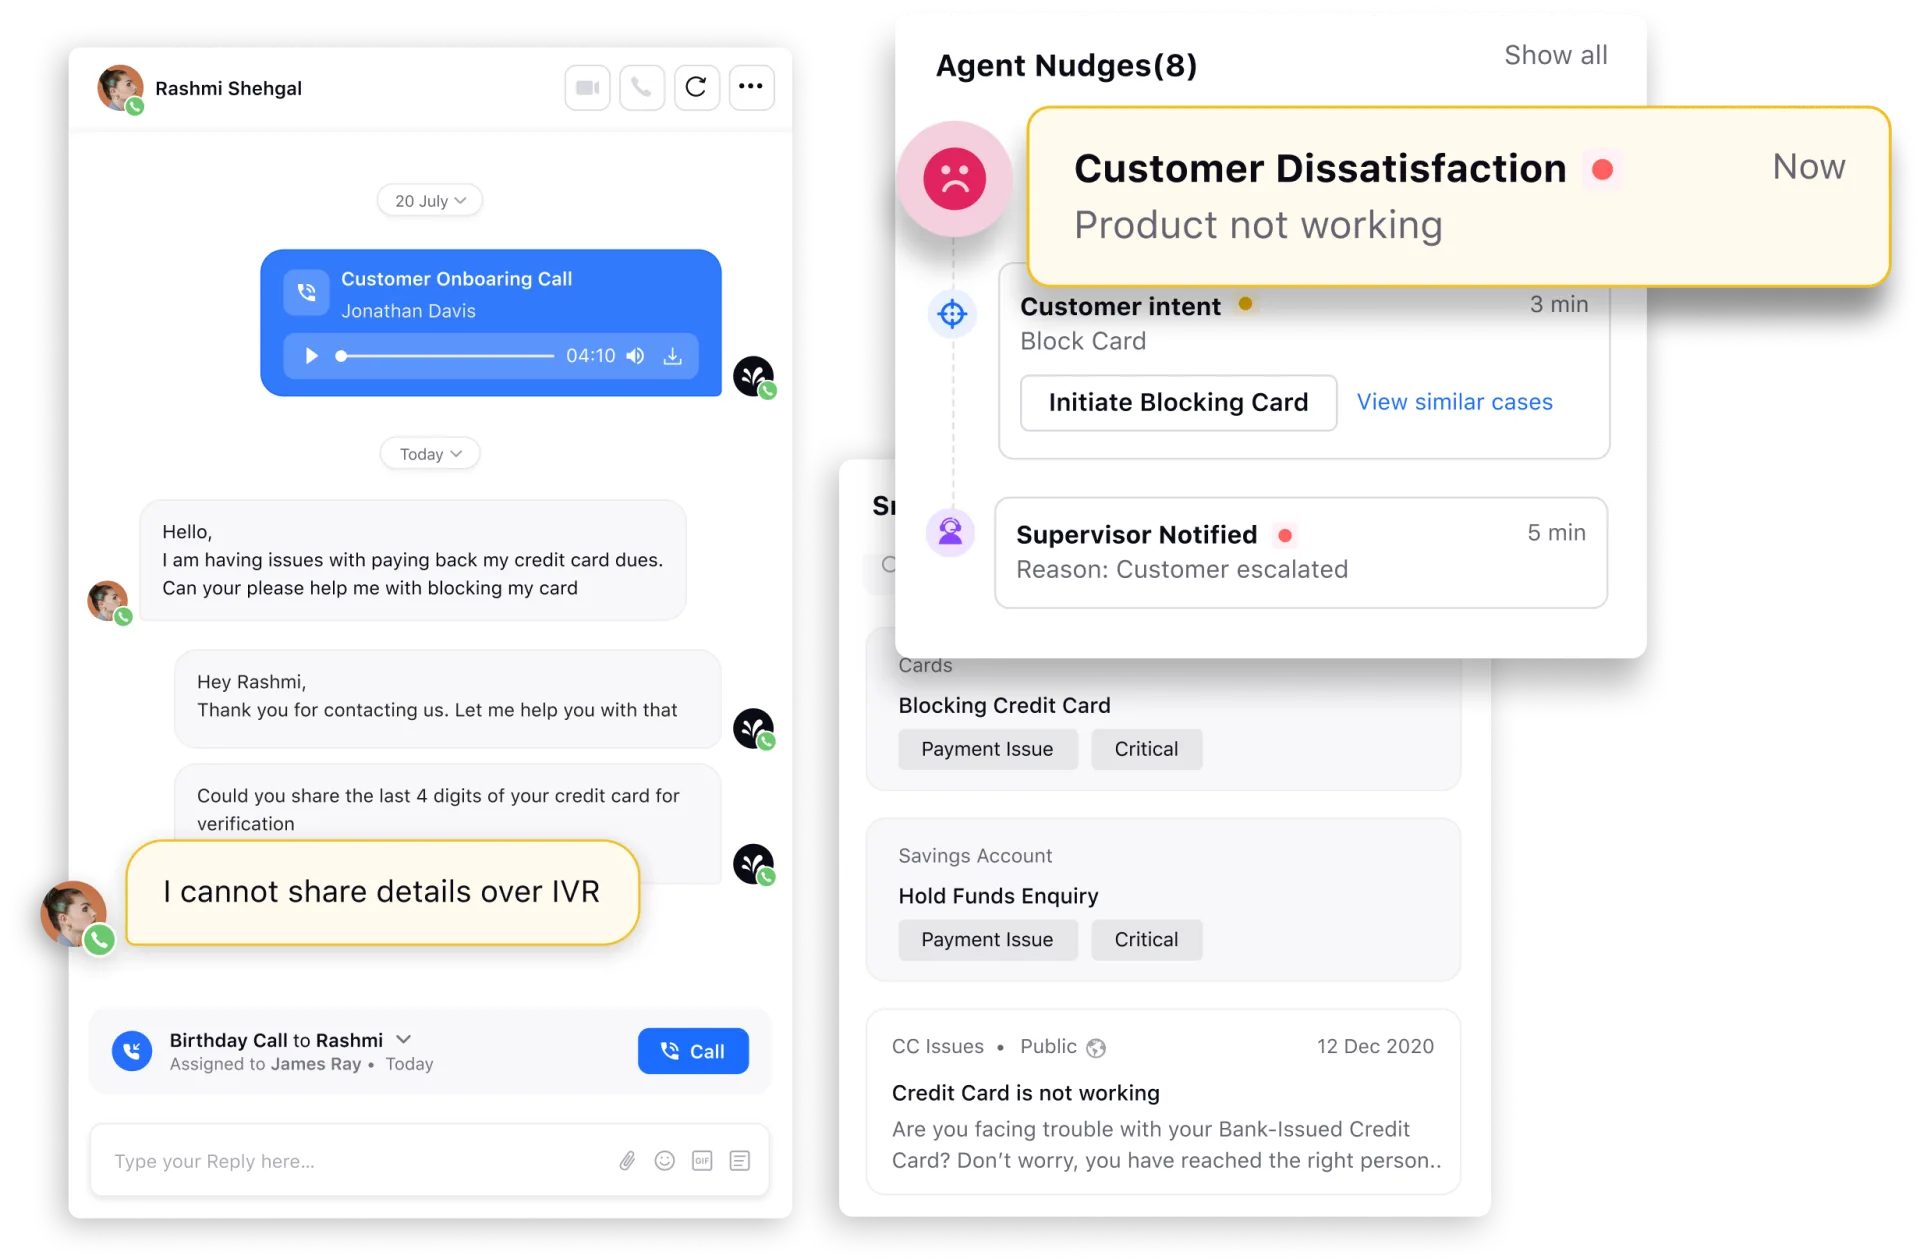 Agent assist software powered by Sprinklr AI